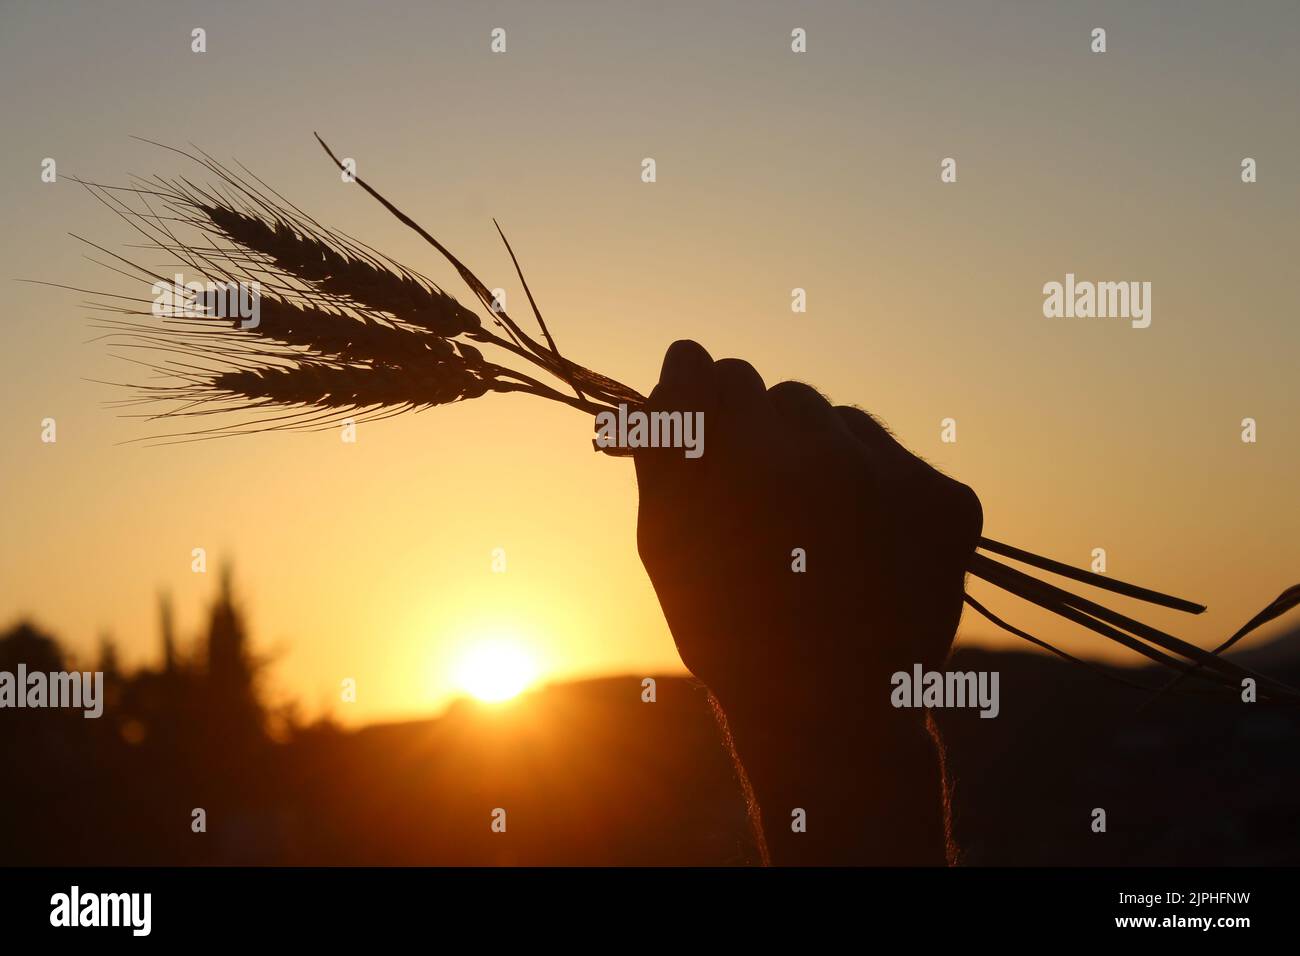 Silhouette of man holding wheat ears under sunset. Food crisis concept idea. Stock Photo